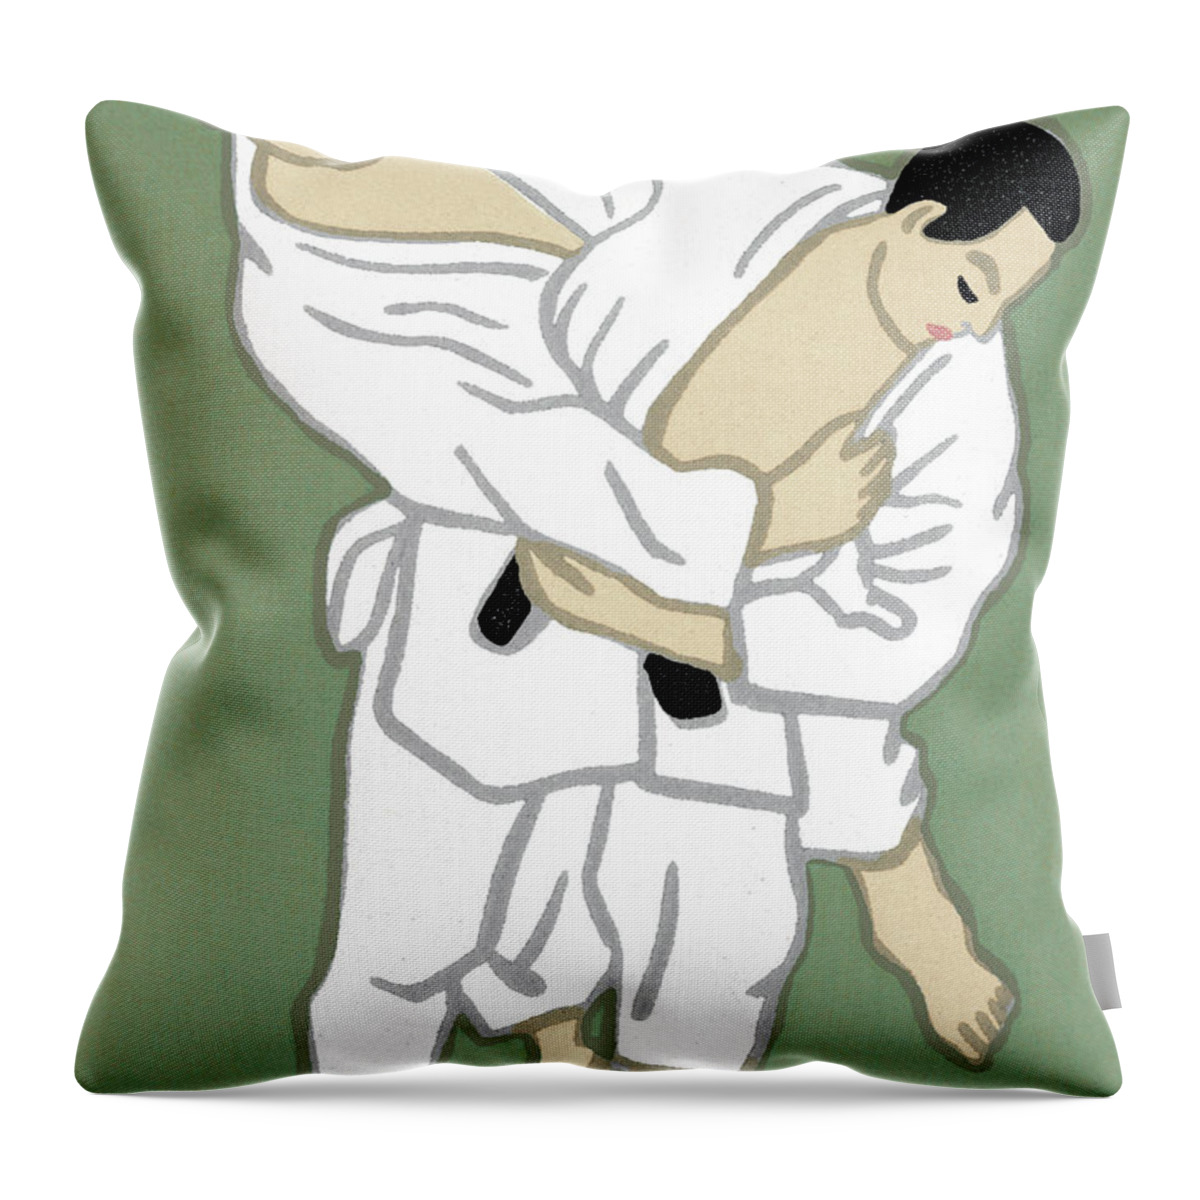 Adult Throw Pillow featuring the drawing Two Men Practicing Karate #2 by CSA Images